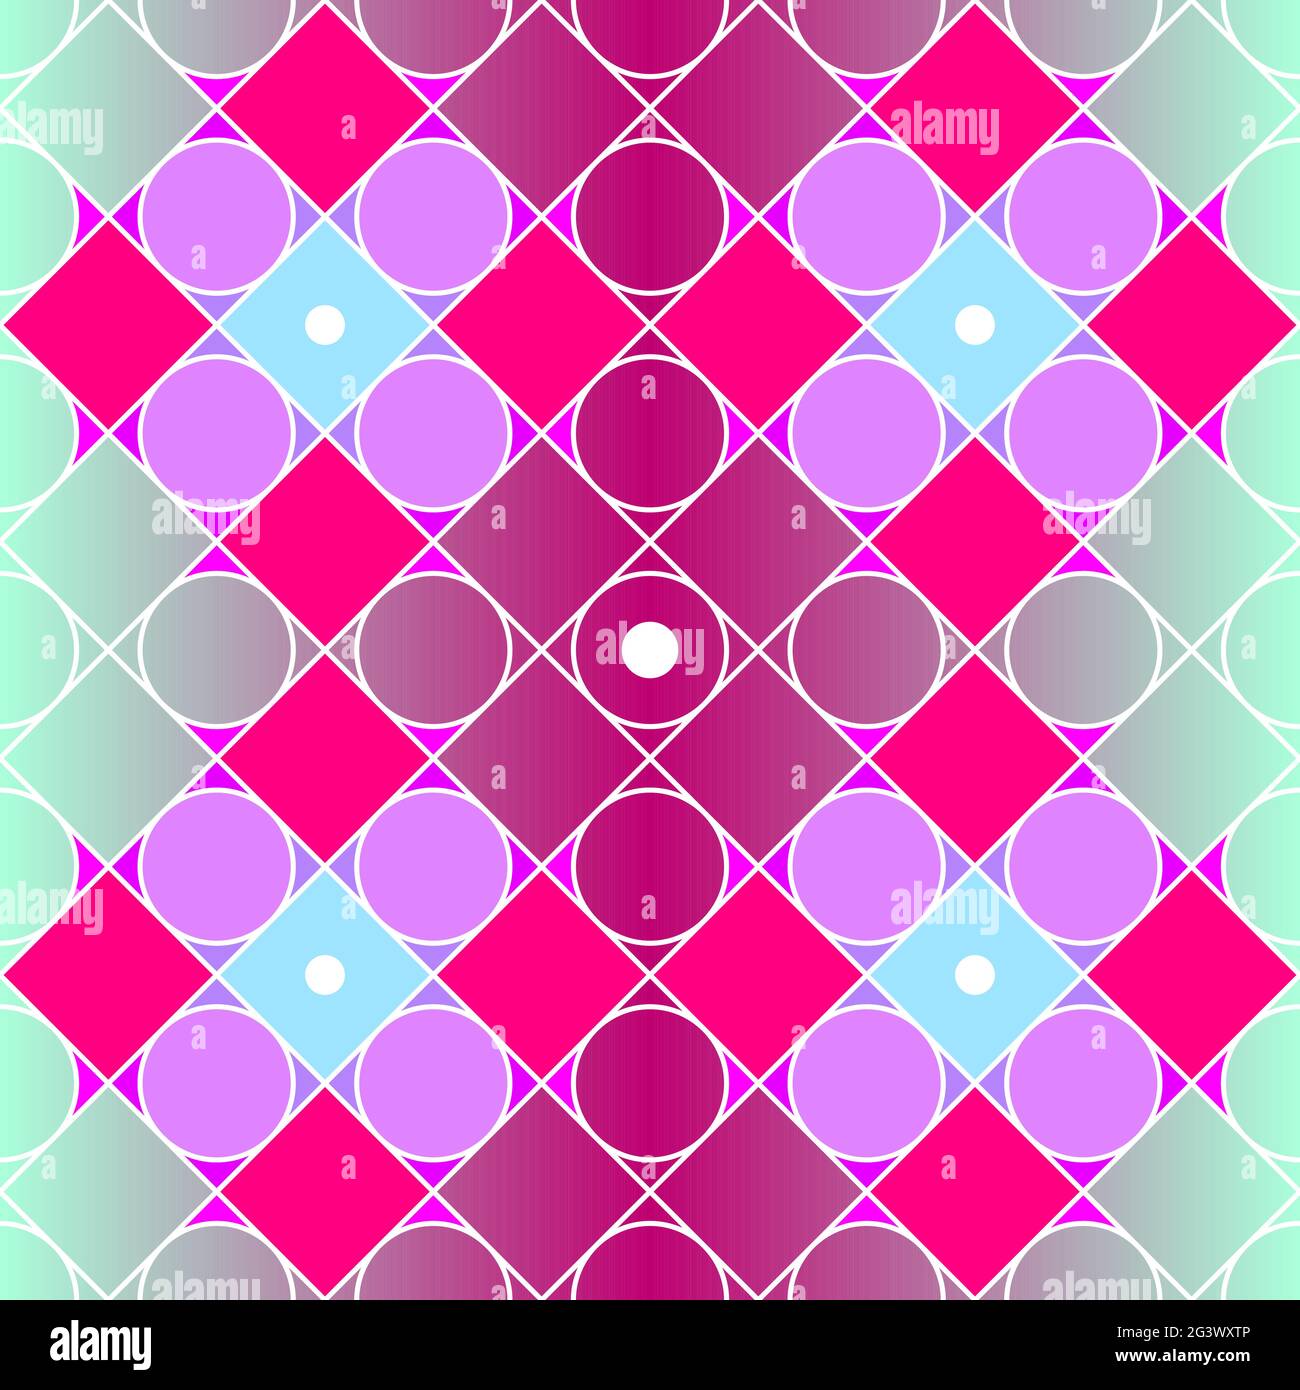 https://c8.alamy.com/comp/2G3WXTP/seamless-vector-gradient-pattern-bright-circles-rhombuses-with-white-lines-smooth-color-transition-image-vector-colorful-illustration-for-wallpape-2G3WXTP.jpg